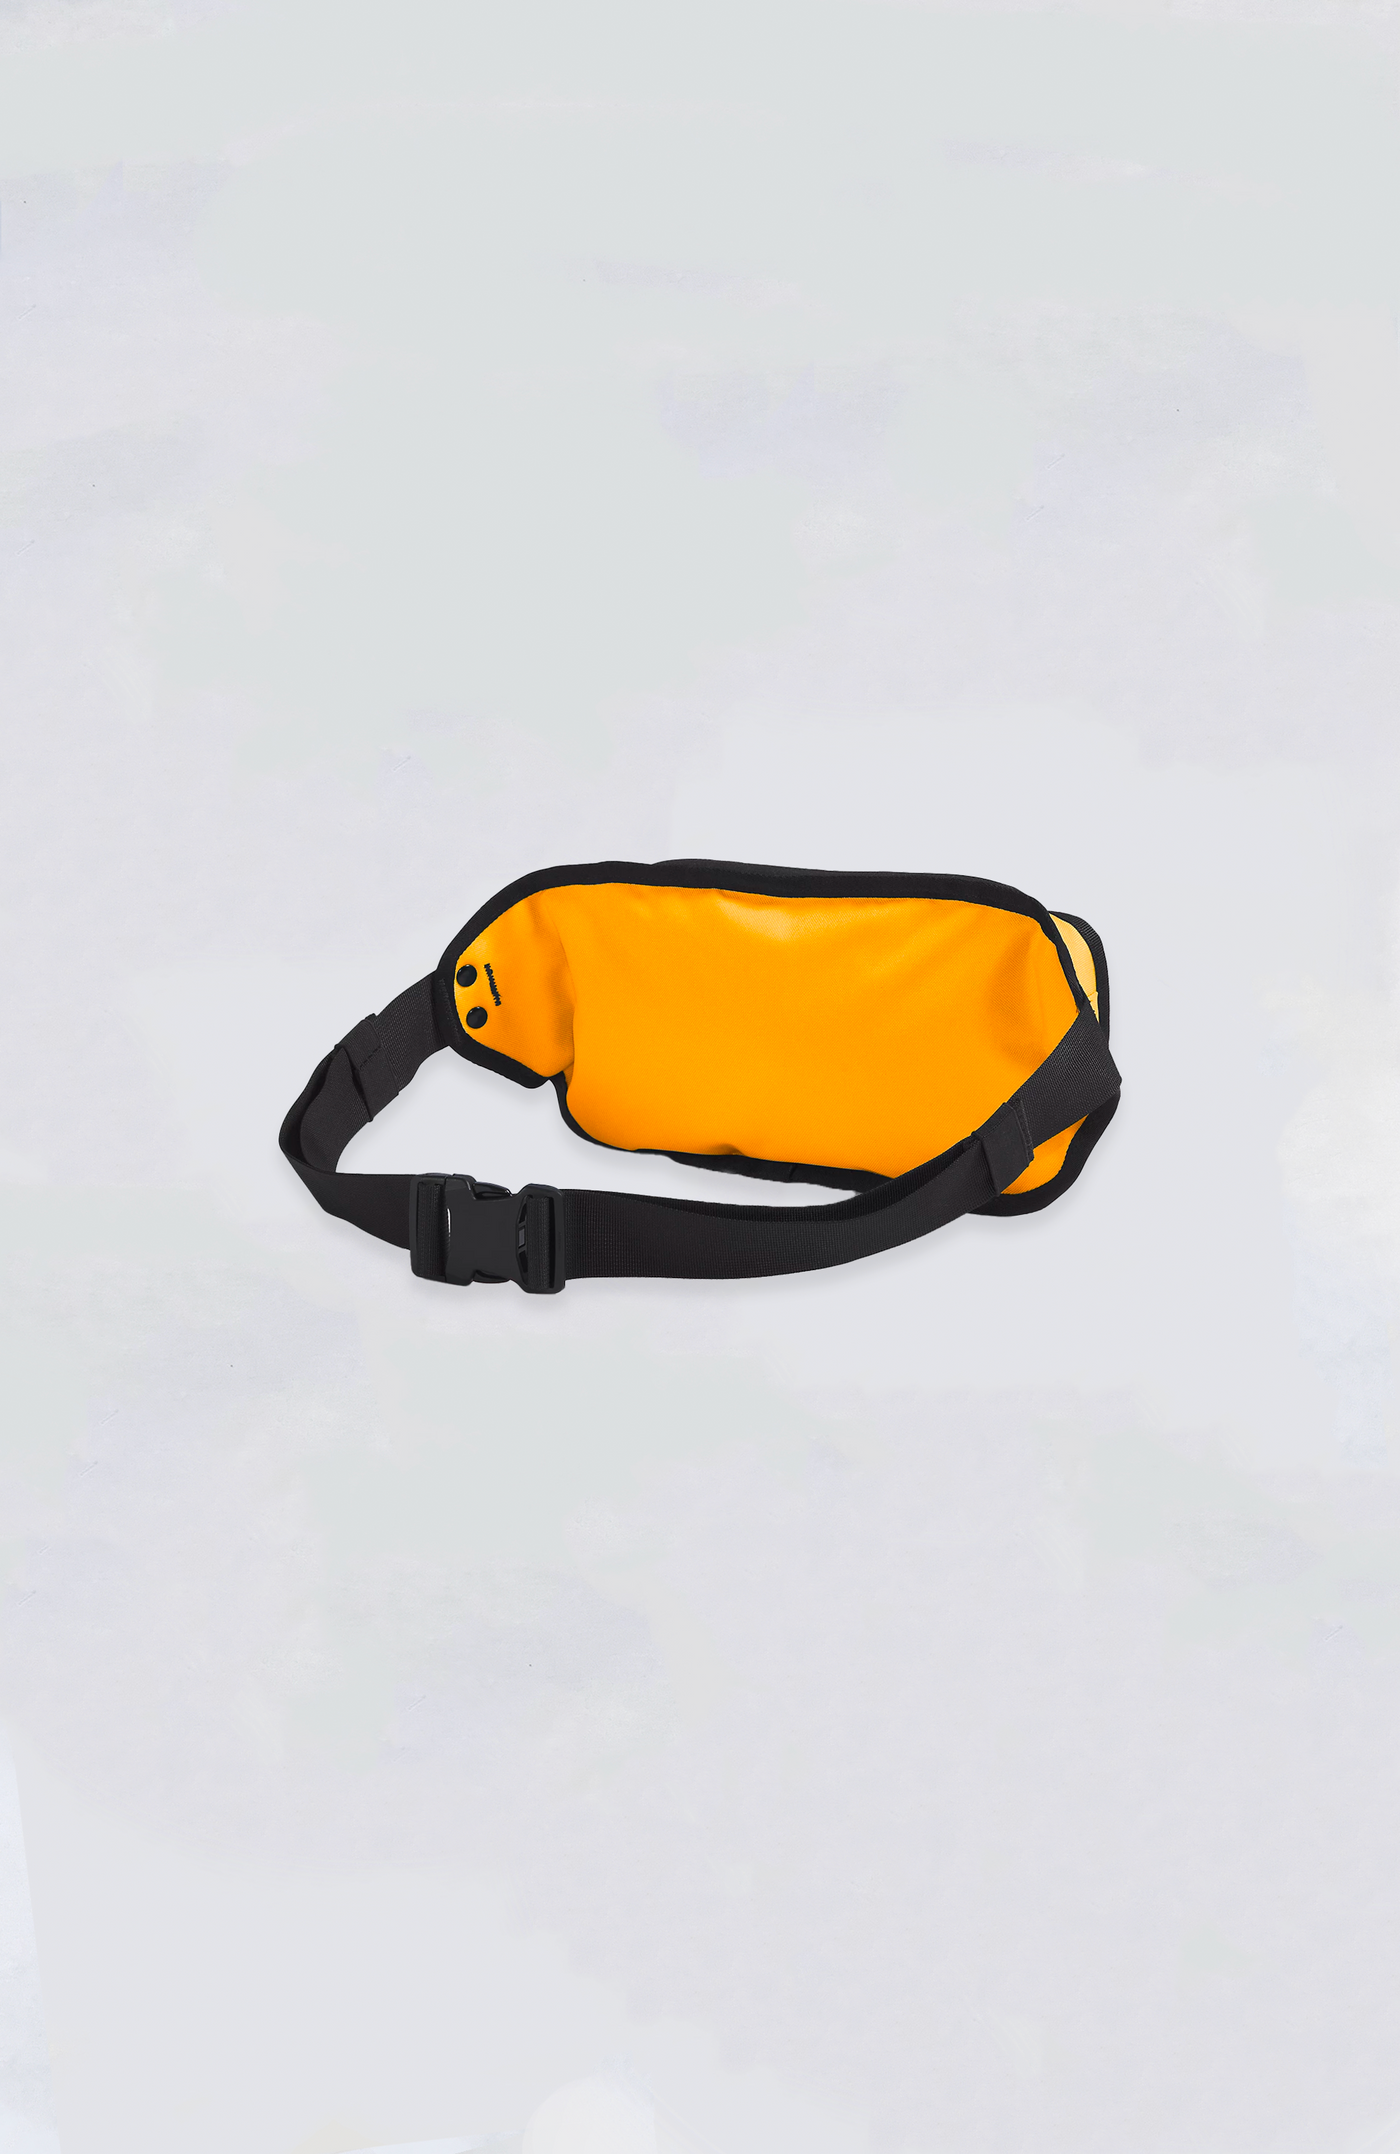 The North Face - Explore Hip Pack